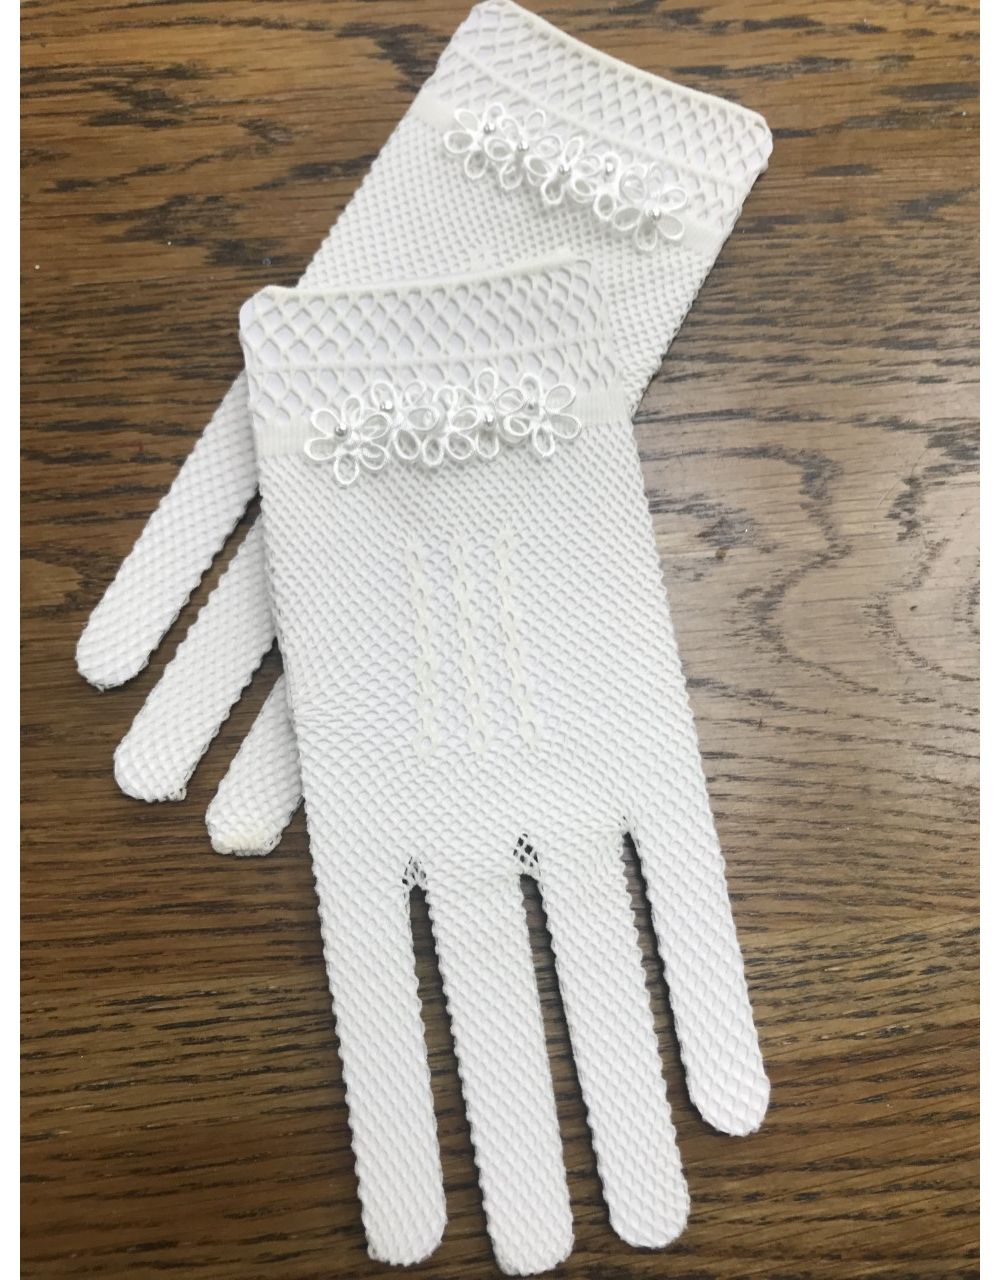 White or Ivory Aire Barcelona Spanish Communion Gloves